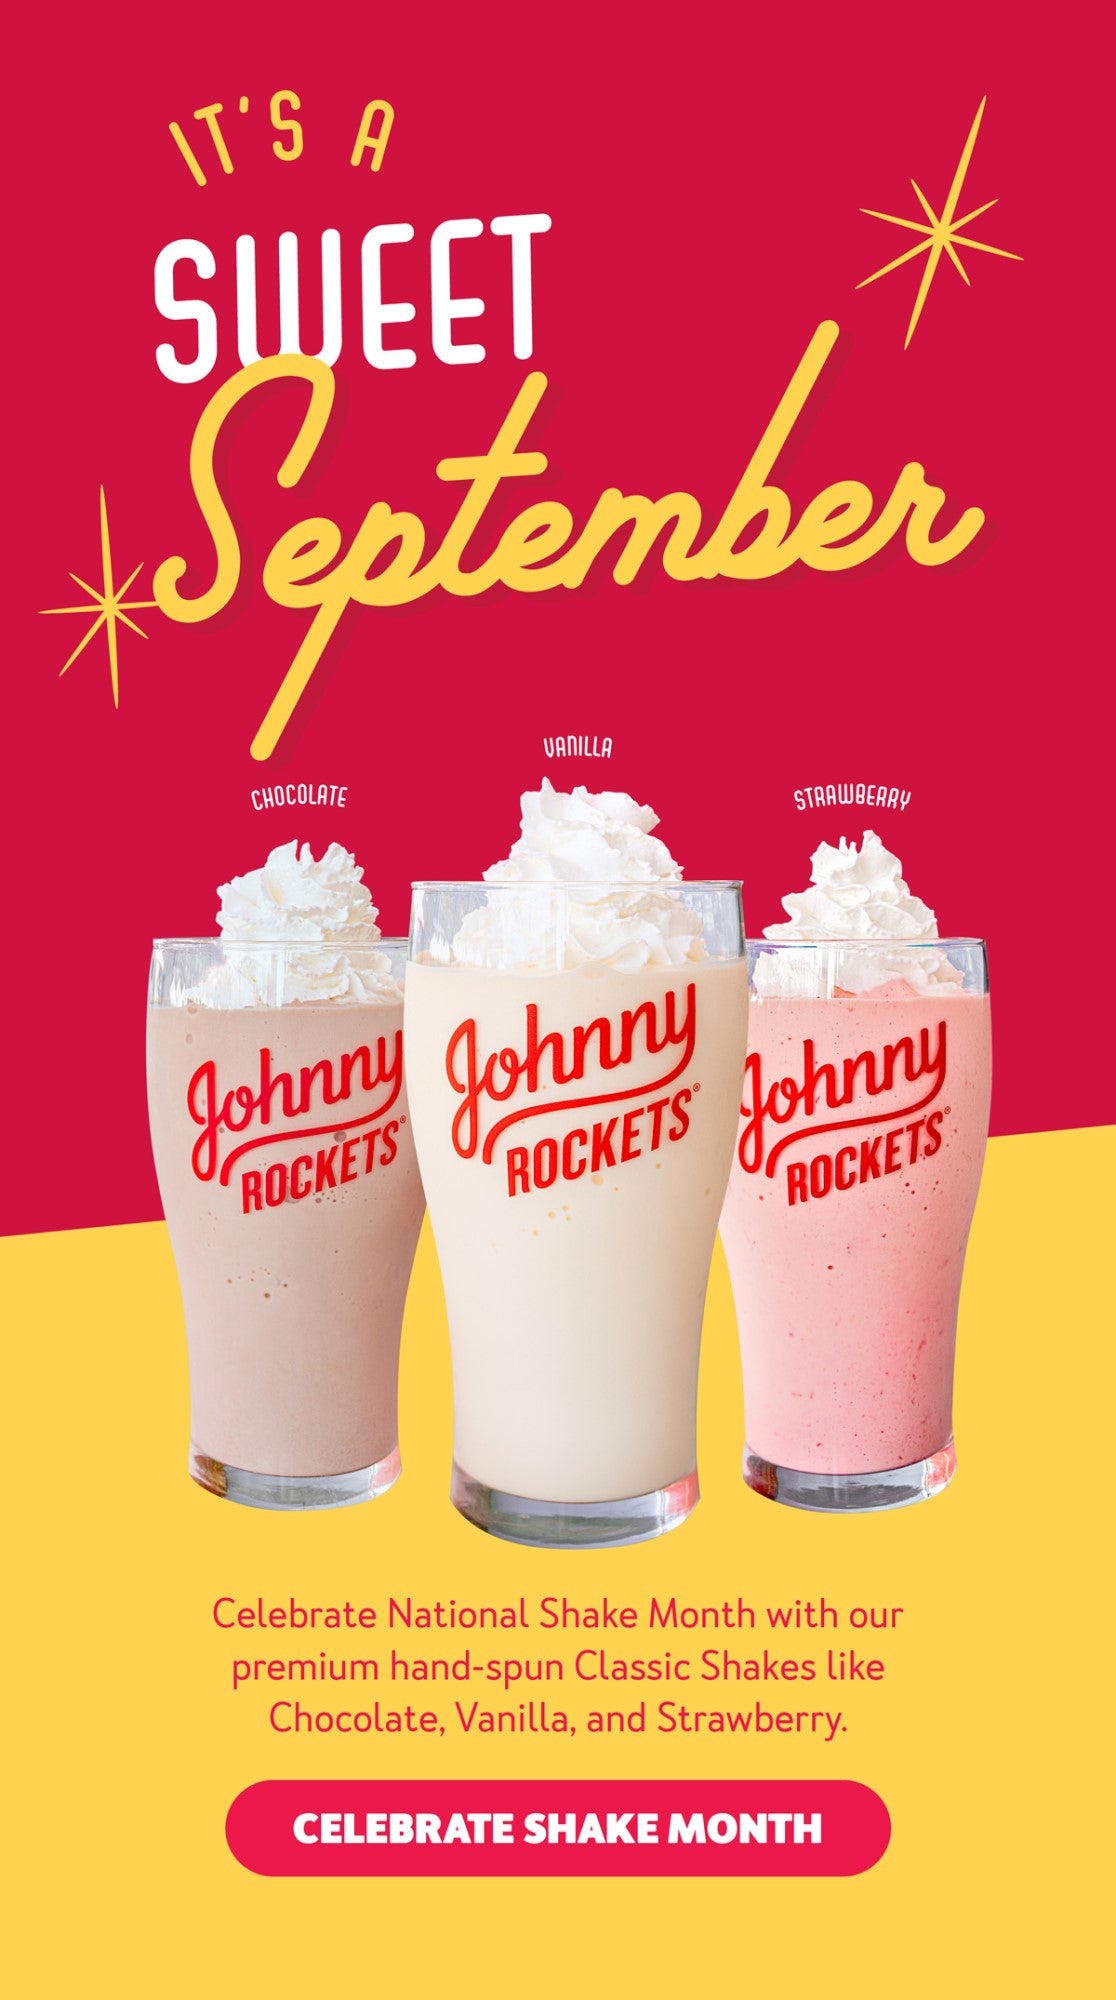 Celebrate National Shake Month with Our Classic Shakes